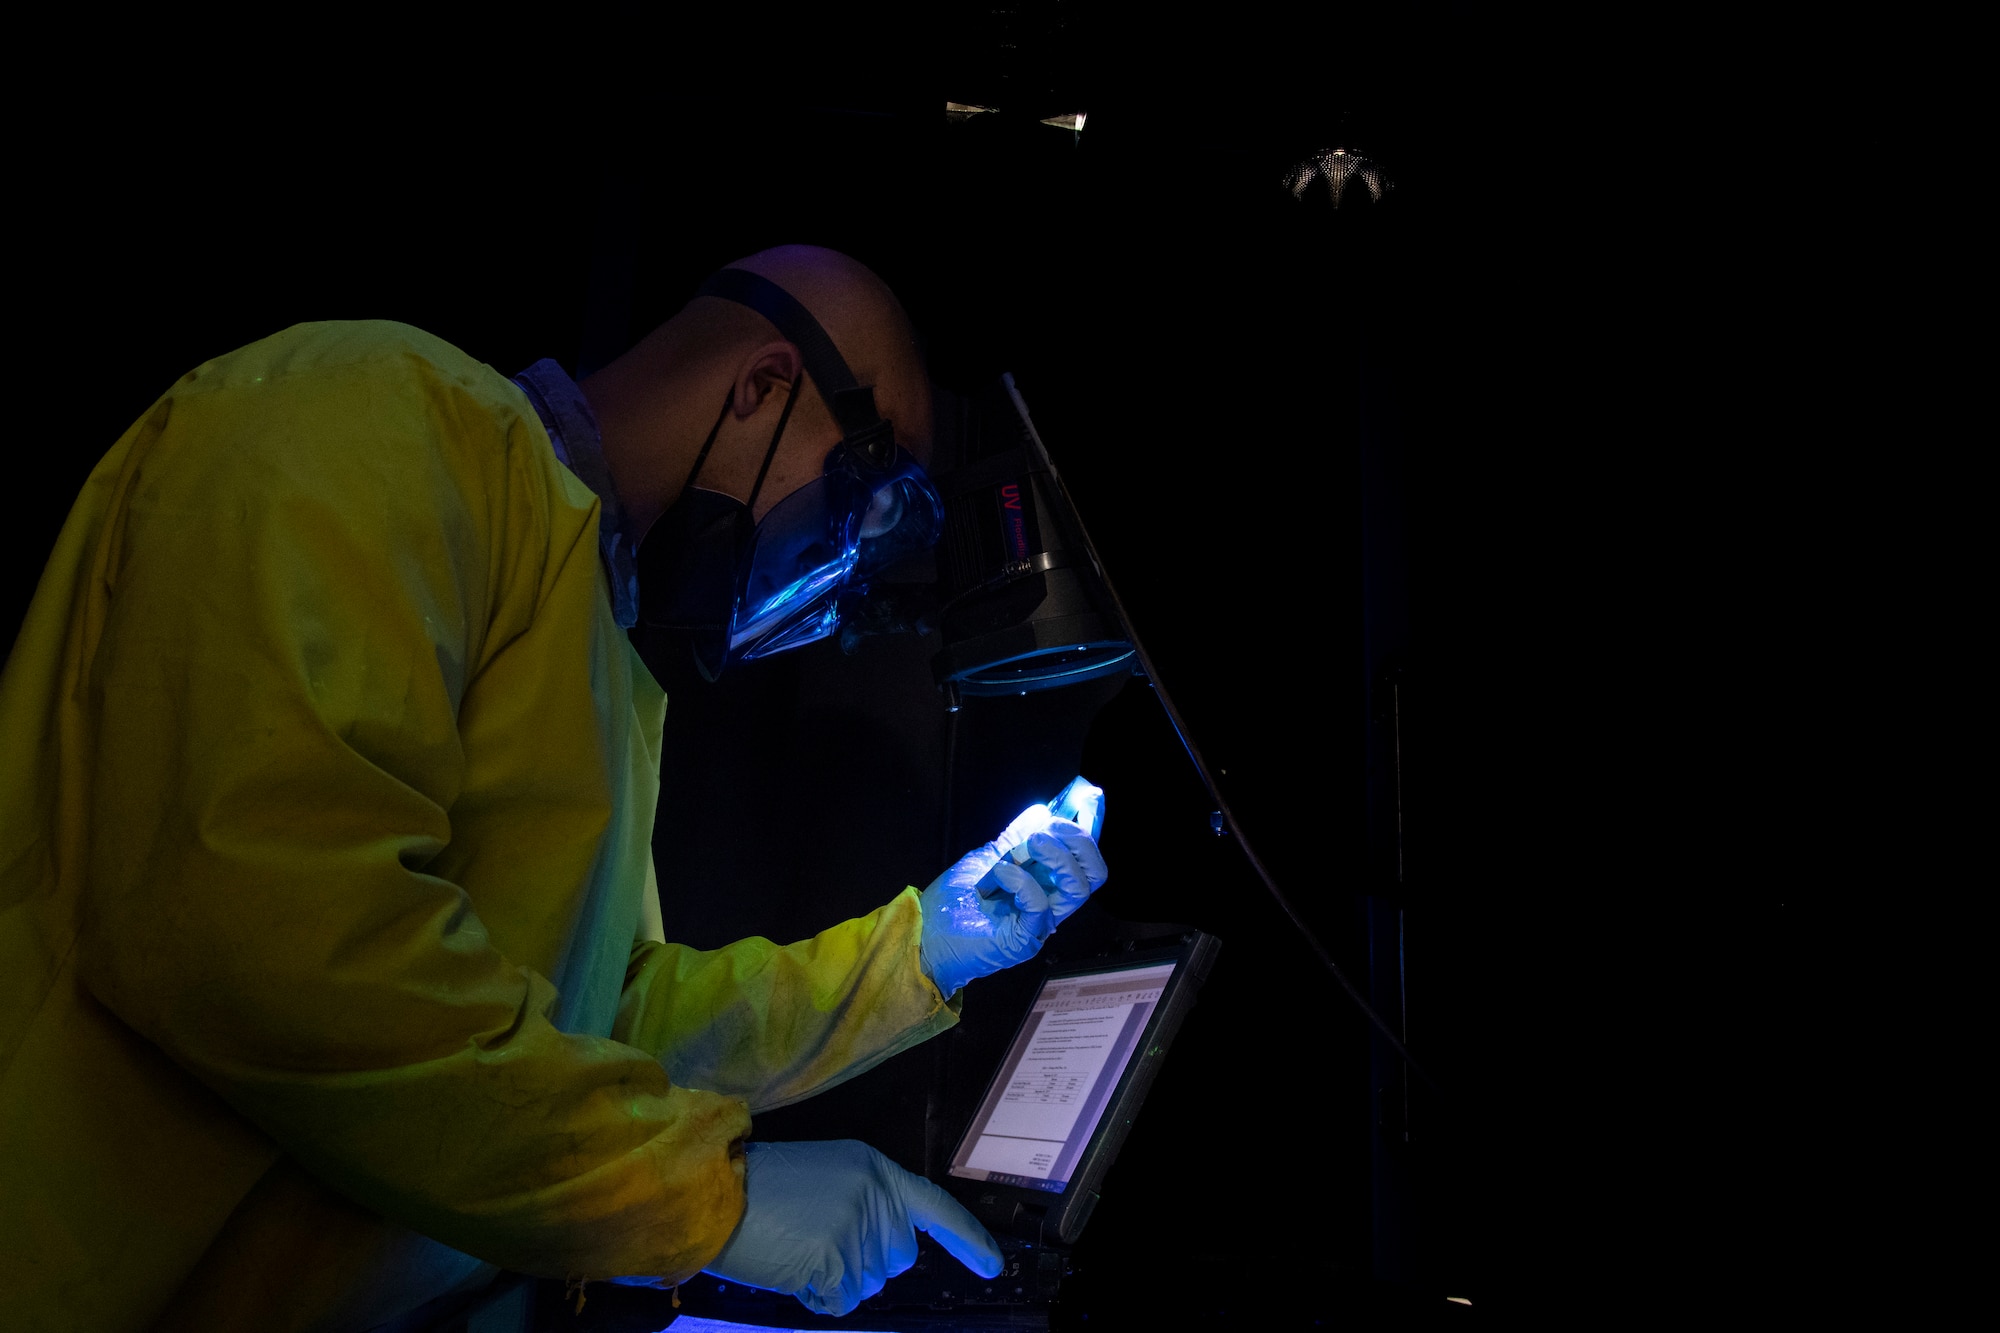 A maintainer with the 6th Maintenance Squadron nondestructive inspections (NDI) unit examines an aircraft part at MacDill Air Force Base, Florida, June 4, 2021.